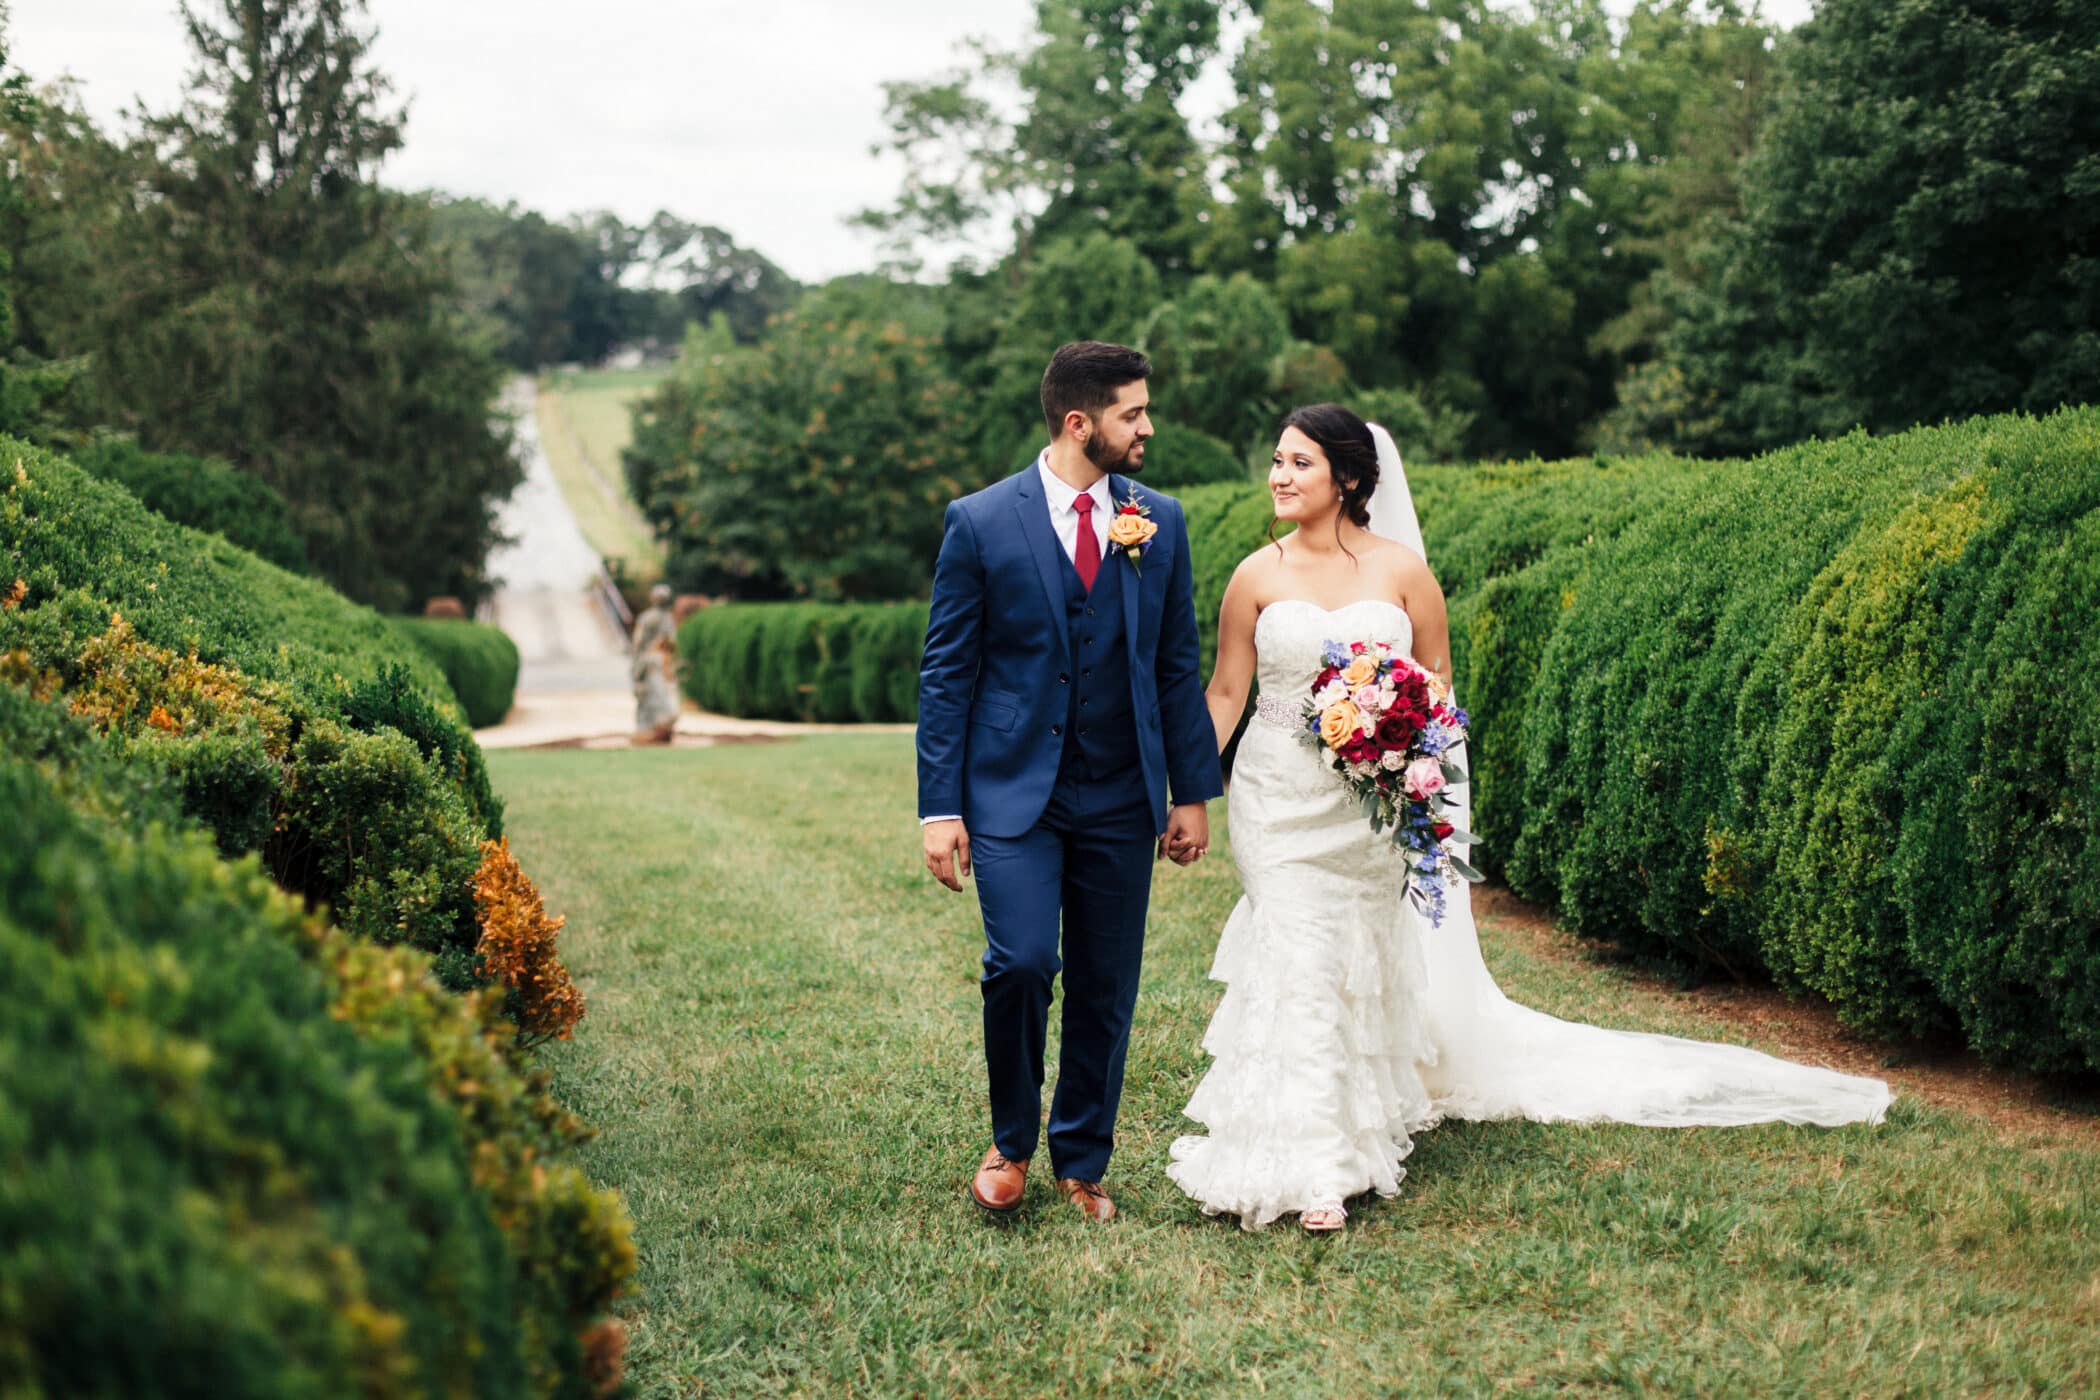 Selecting Your Virginia Wedding Venue | Entwined Events | Venue: West Manor Estate in Forest, VA | Photo Credit: Ellie Richardson Photography